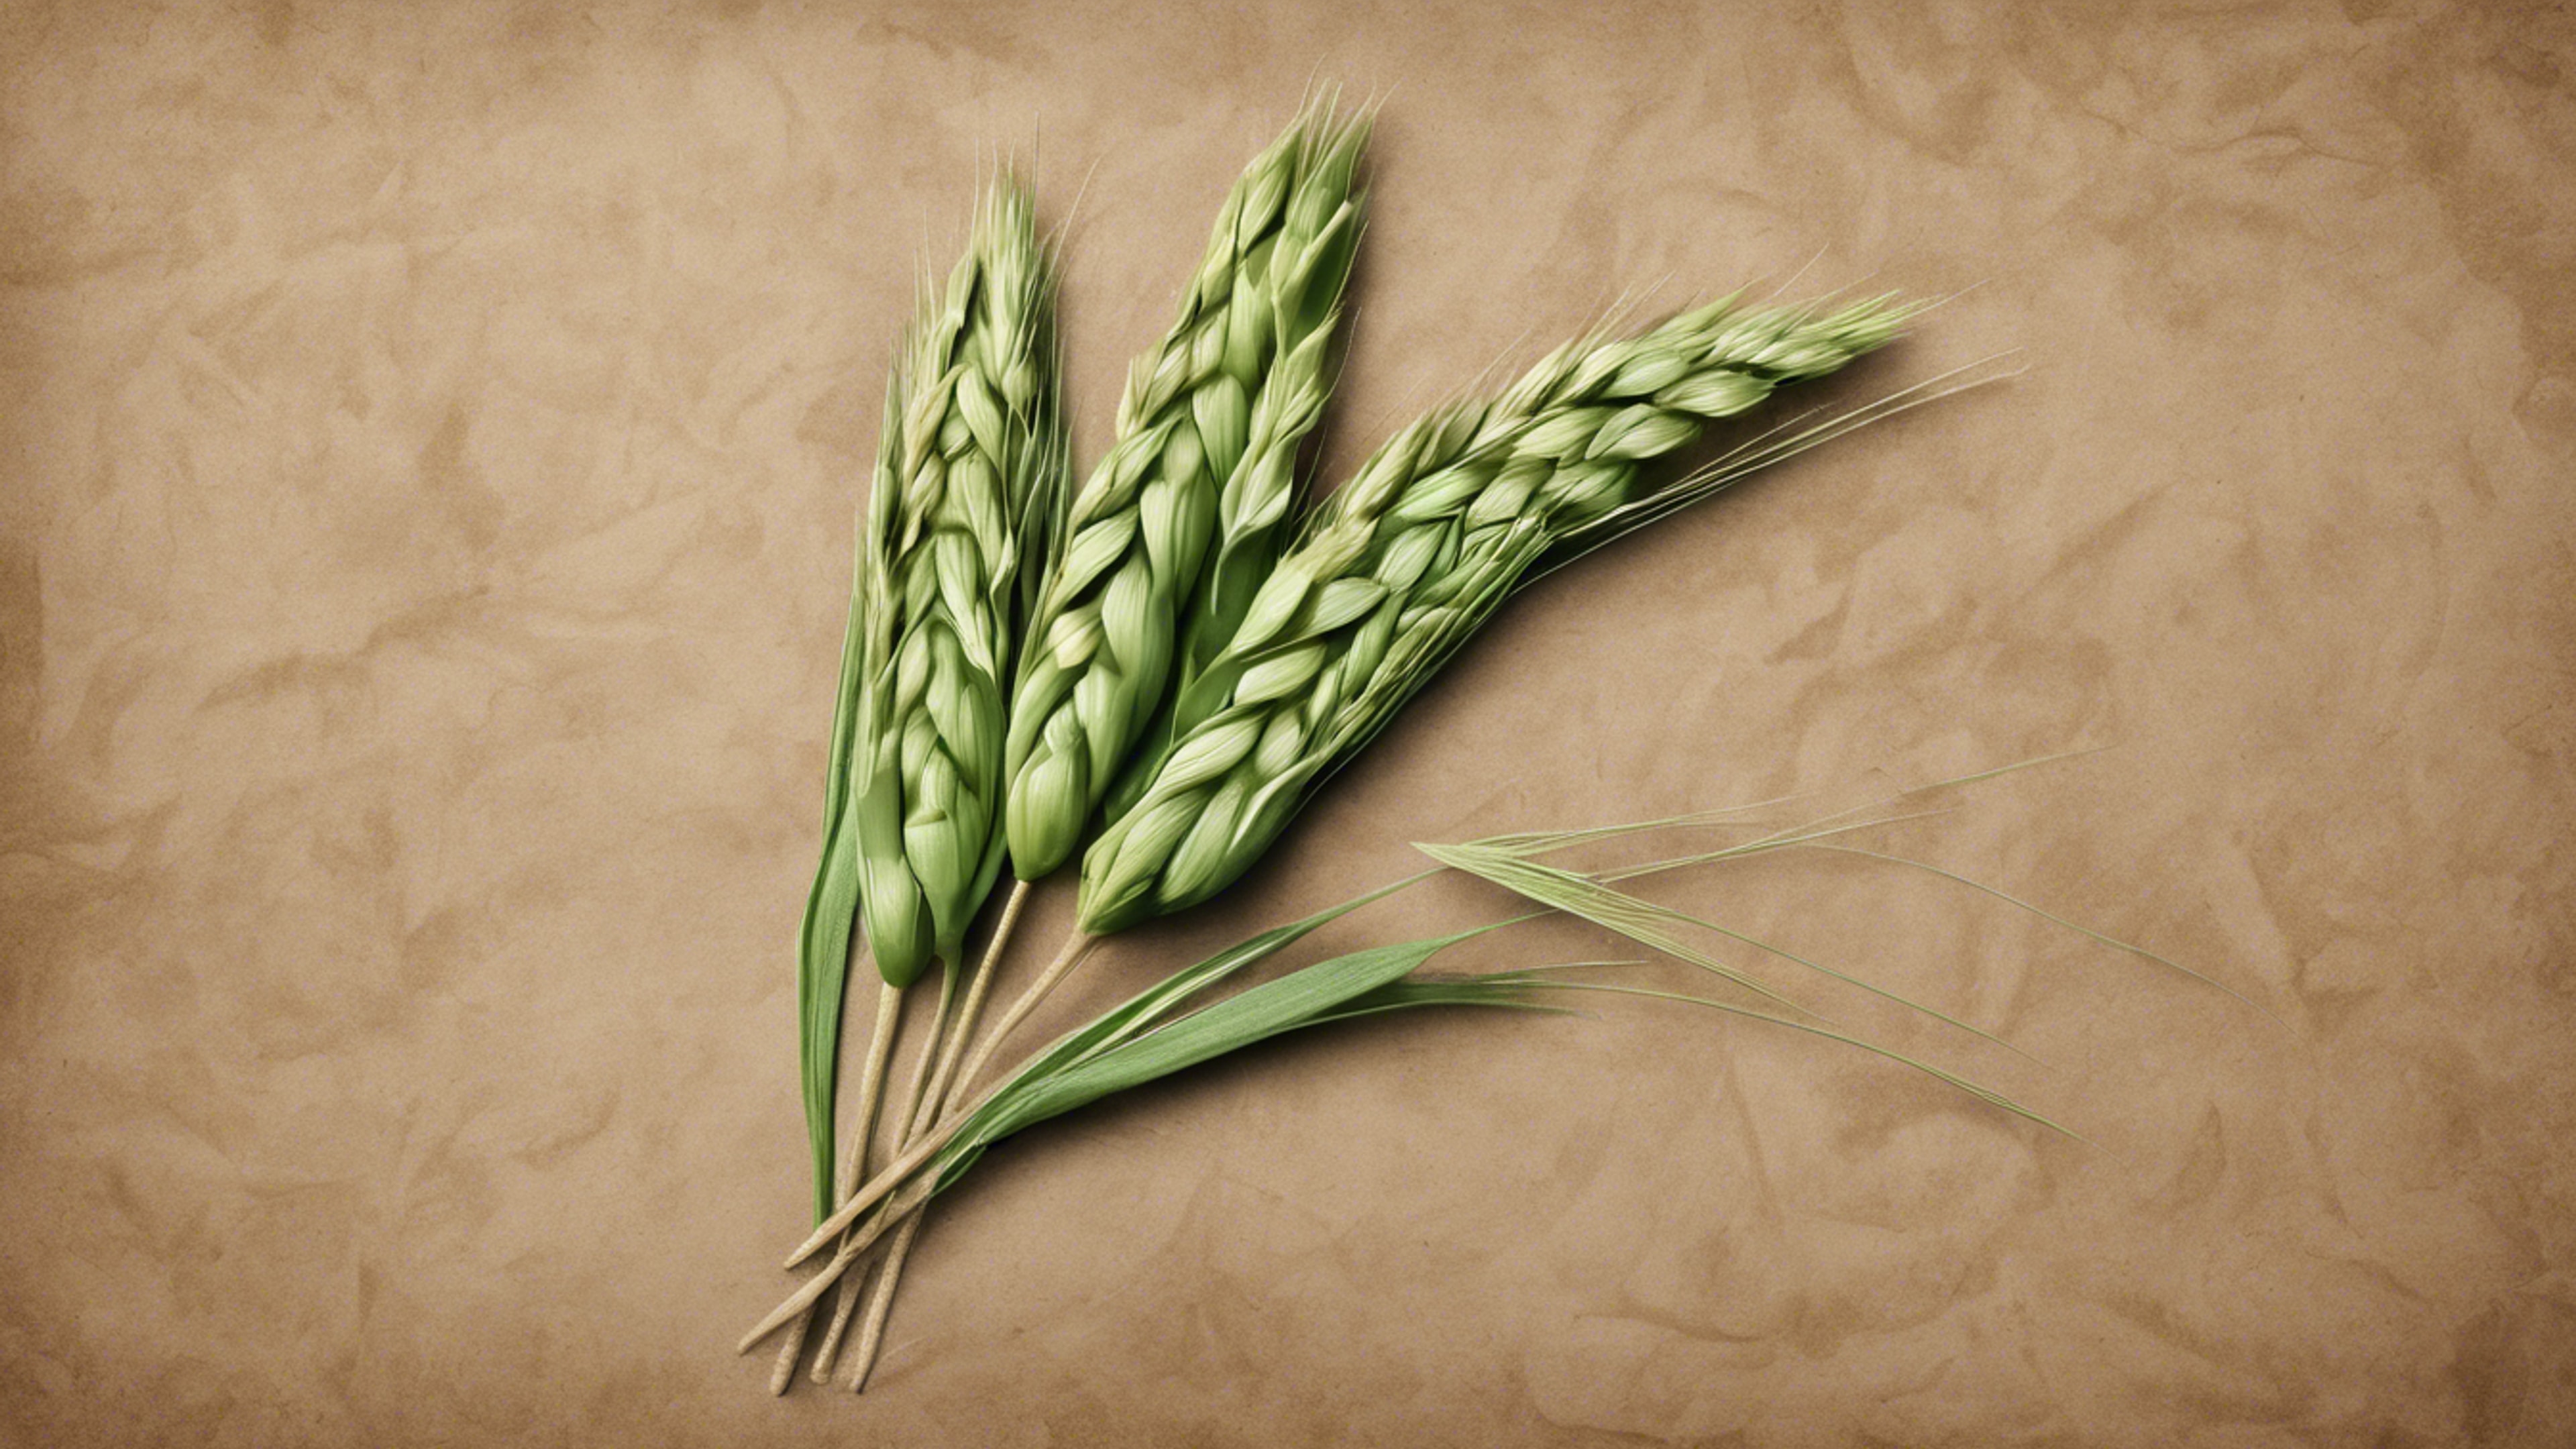 A detailed botanical illustration of a stalk of green wheat against an aged brown paper background. Wallpaper[958050ab552342b3bed0]